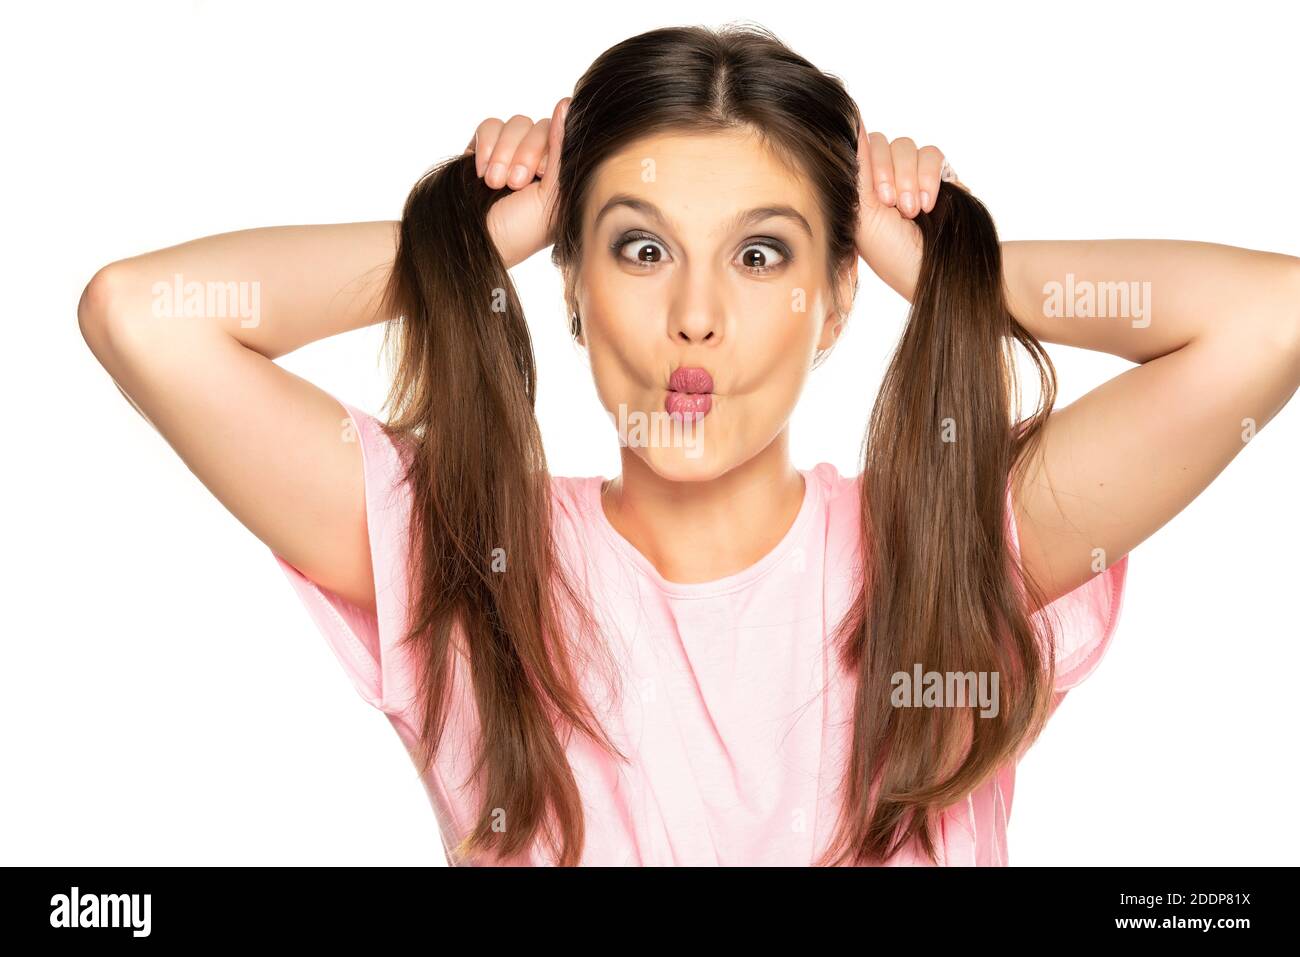 Young funny woman with pony tails make a faces on white background Stock Photo